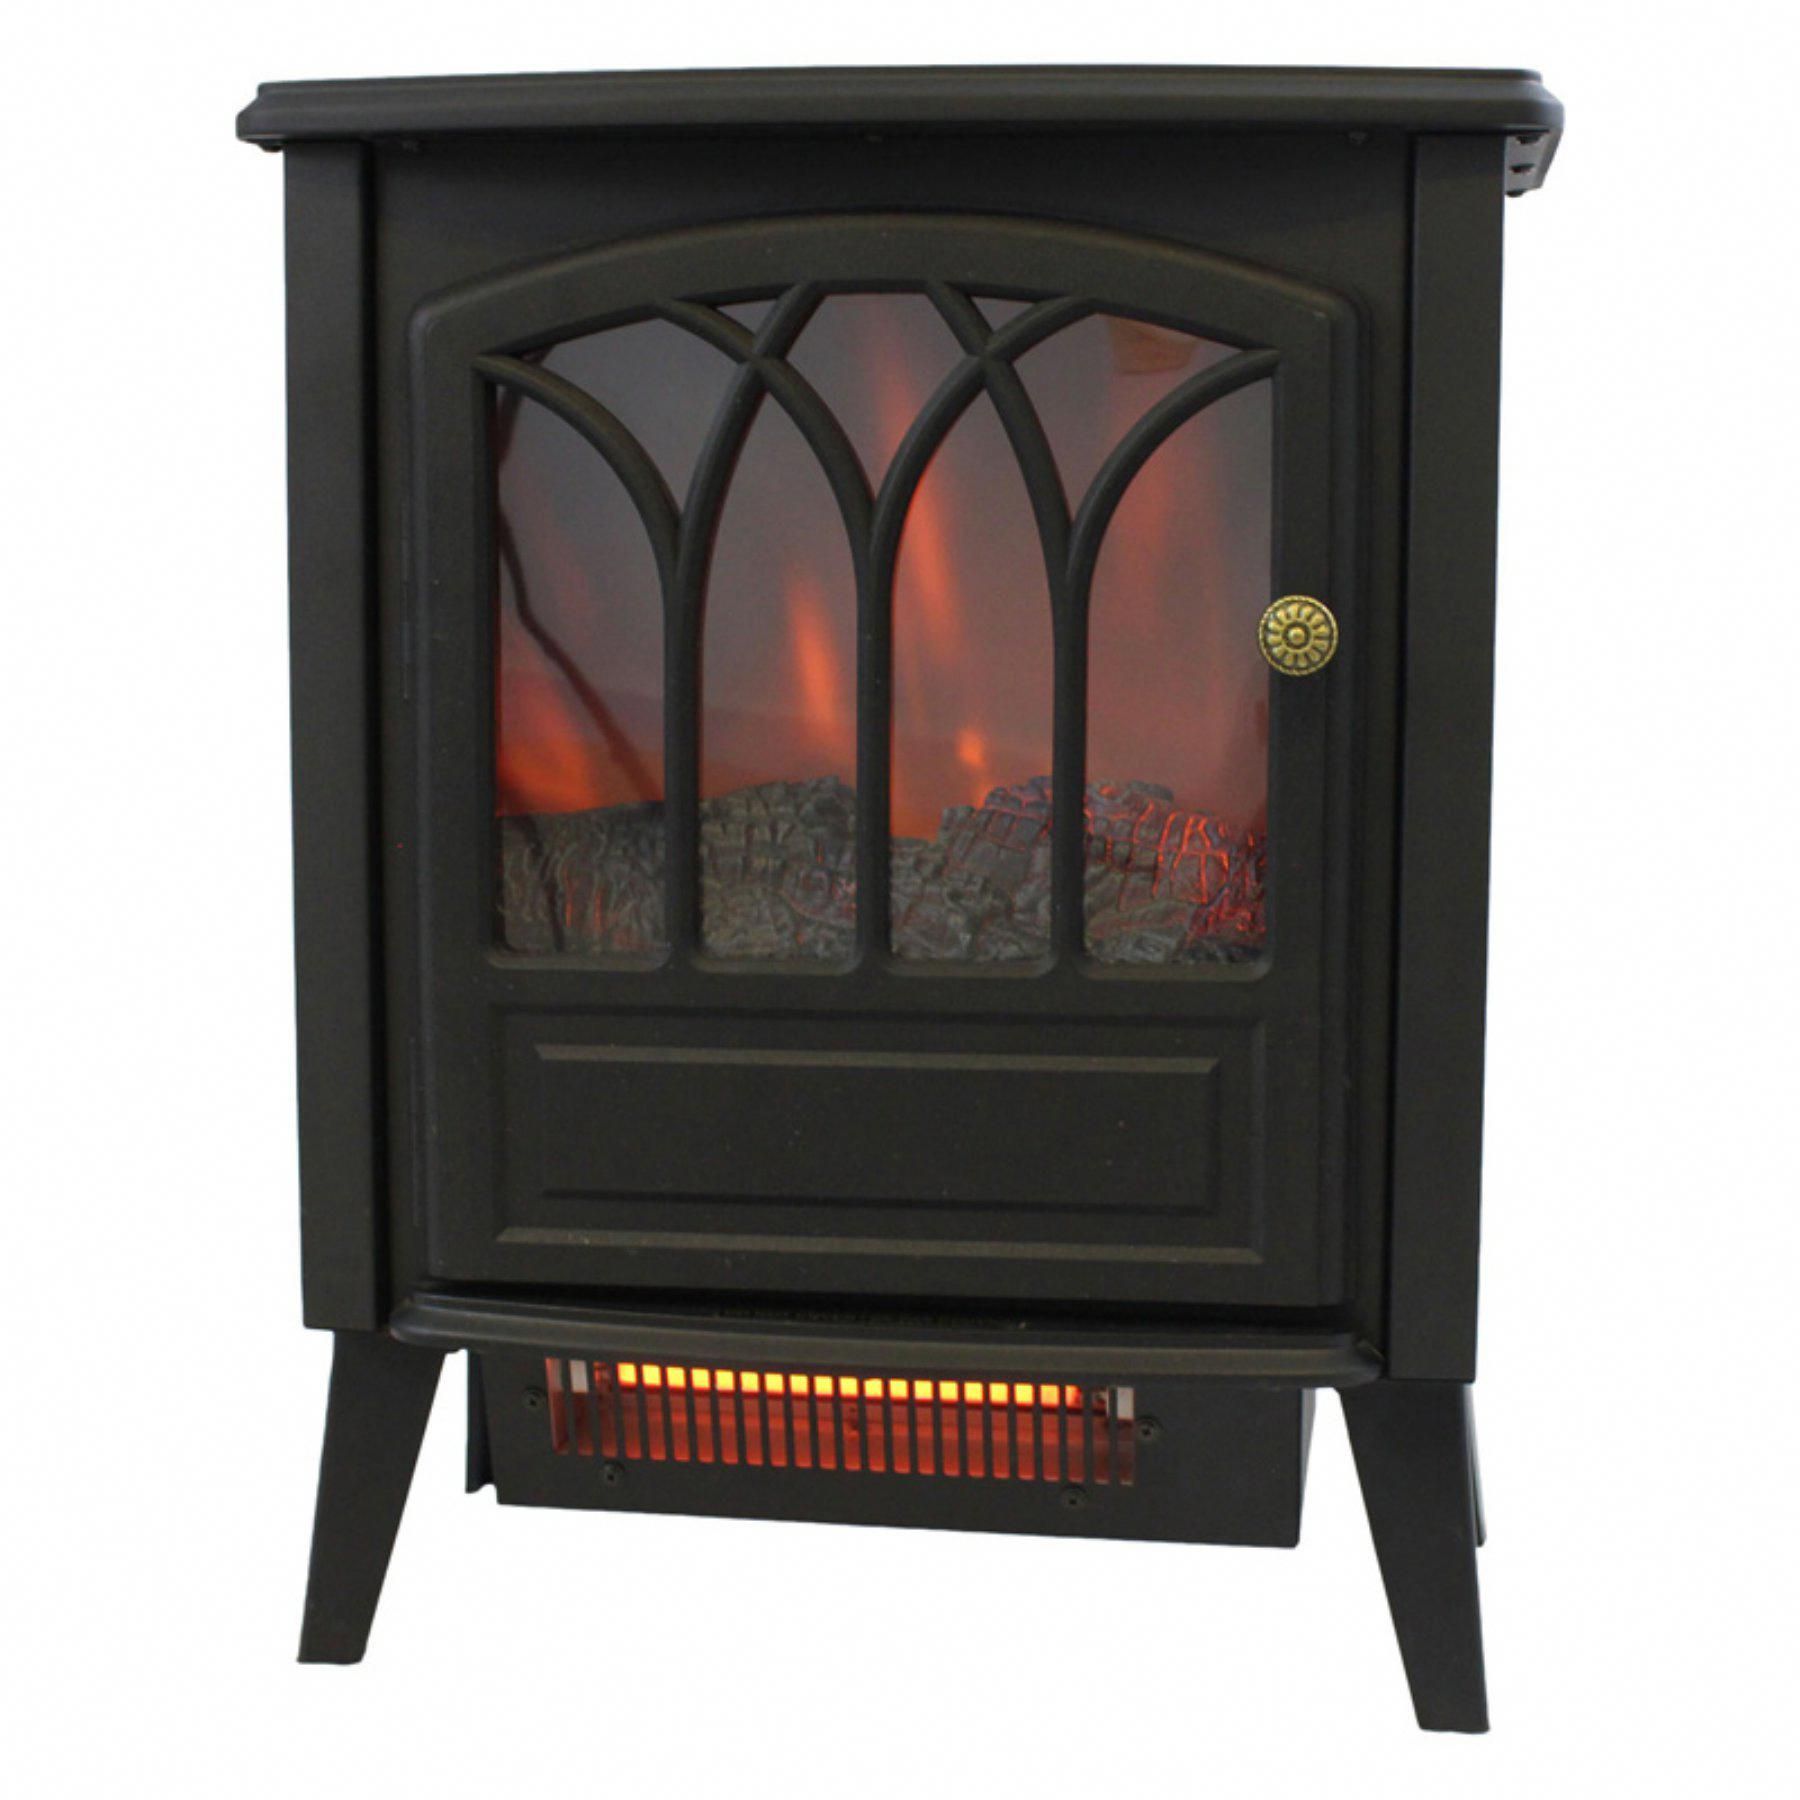 Duraflame Fireplace Elegant fort Glow Allendale Infrared Quartz Electric Stove